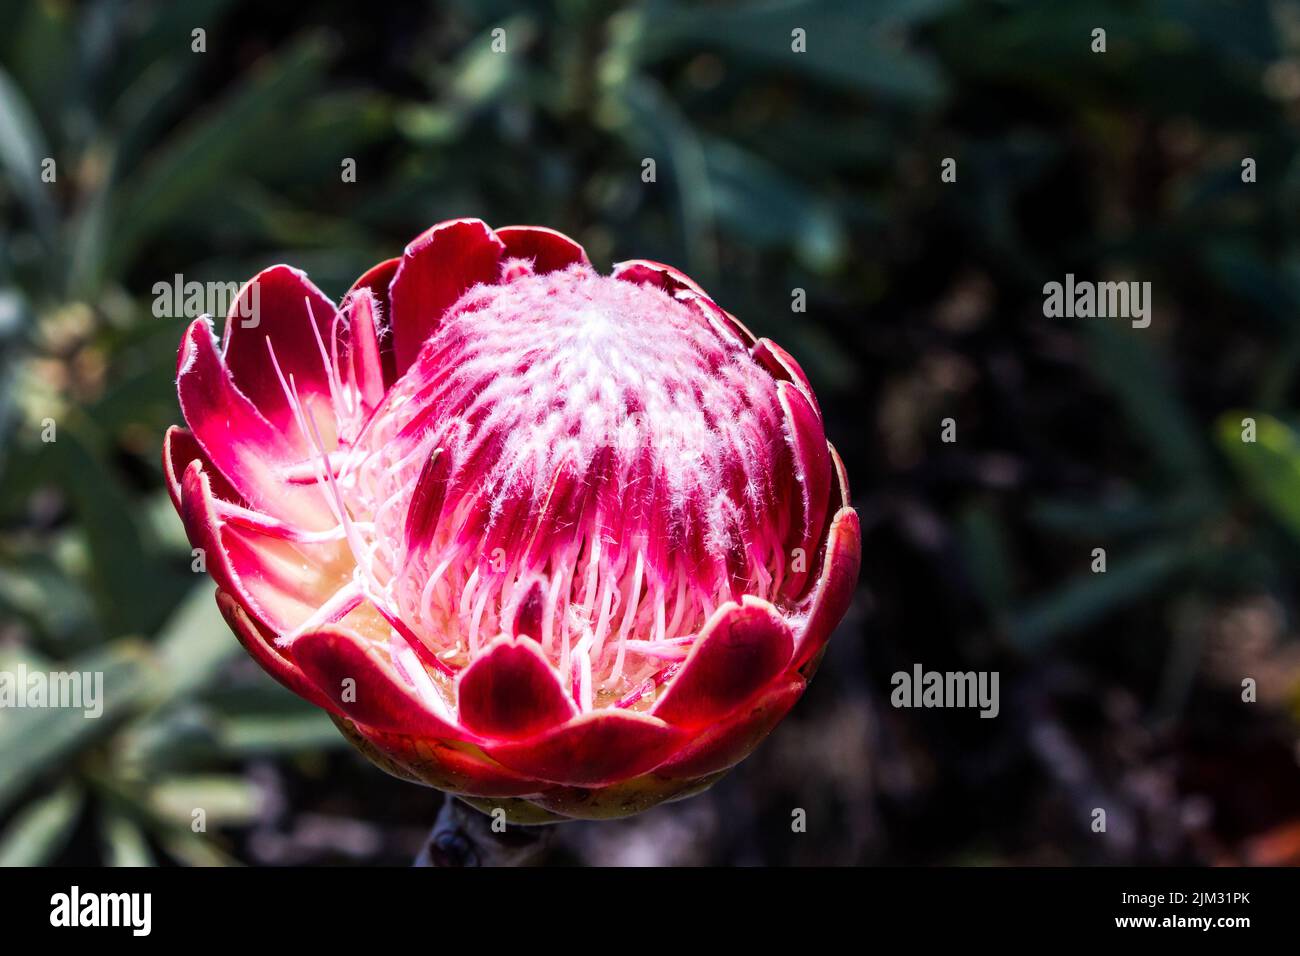 The flower head of a bright pink Sugar bush, Protea Caffra, in the Kloofendal suburban Park, Roodepoort, South Africa Stock Photo